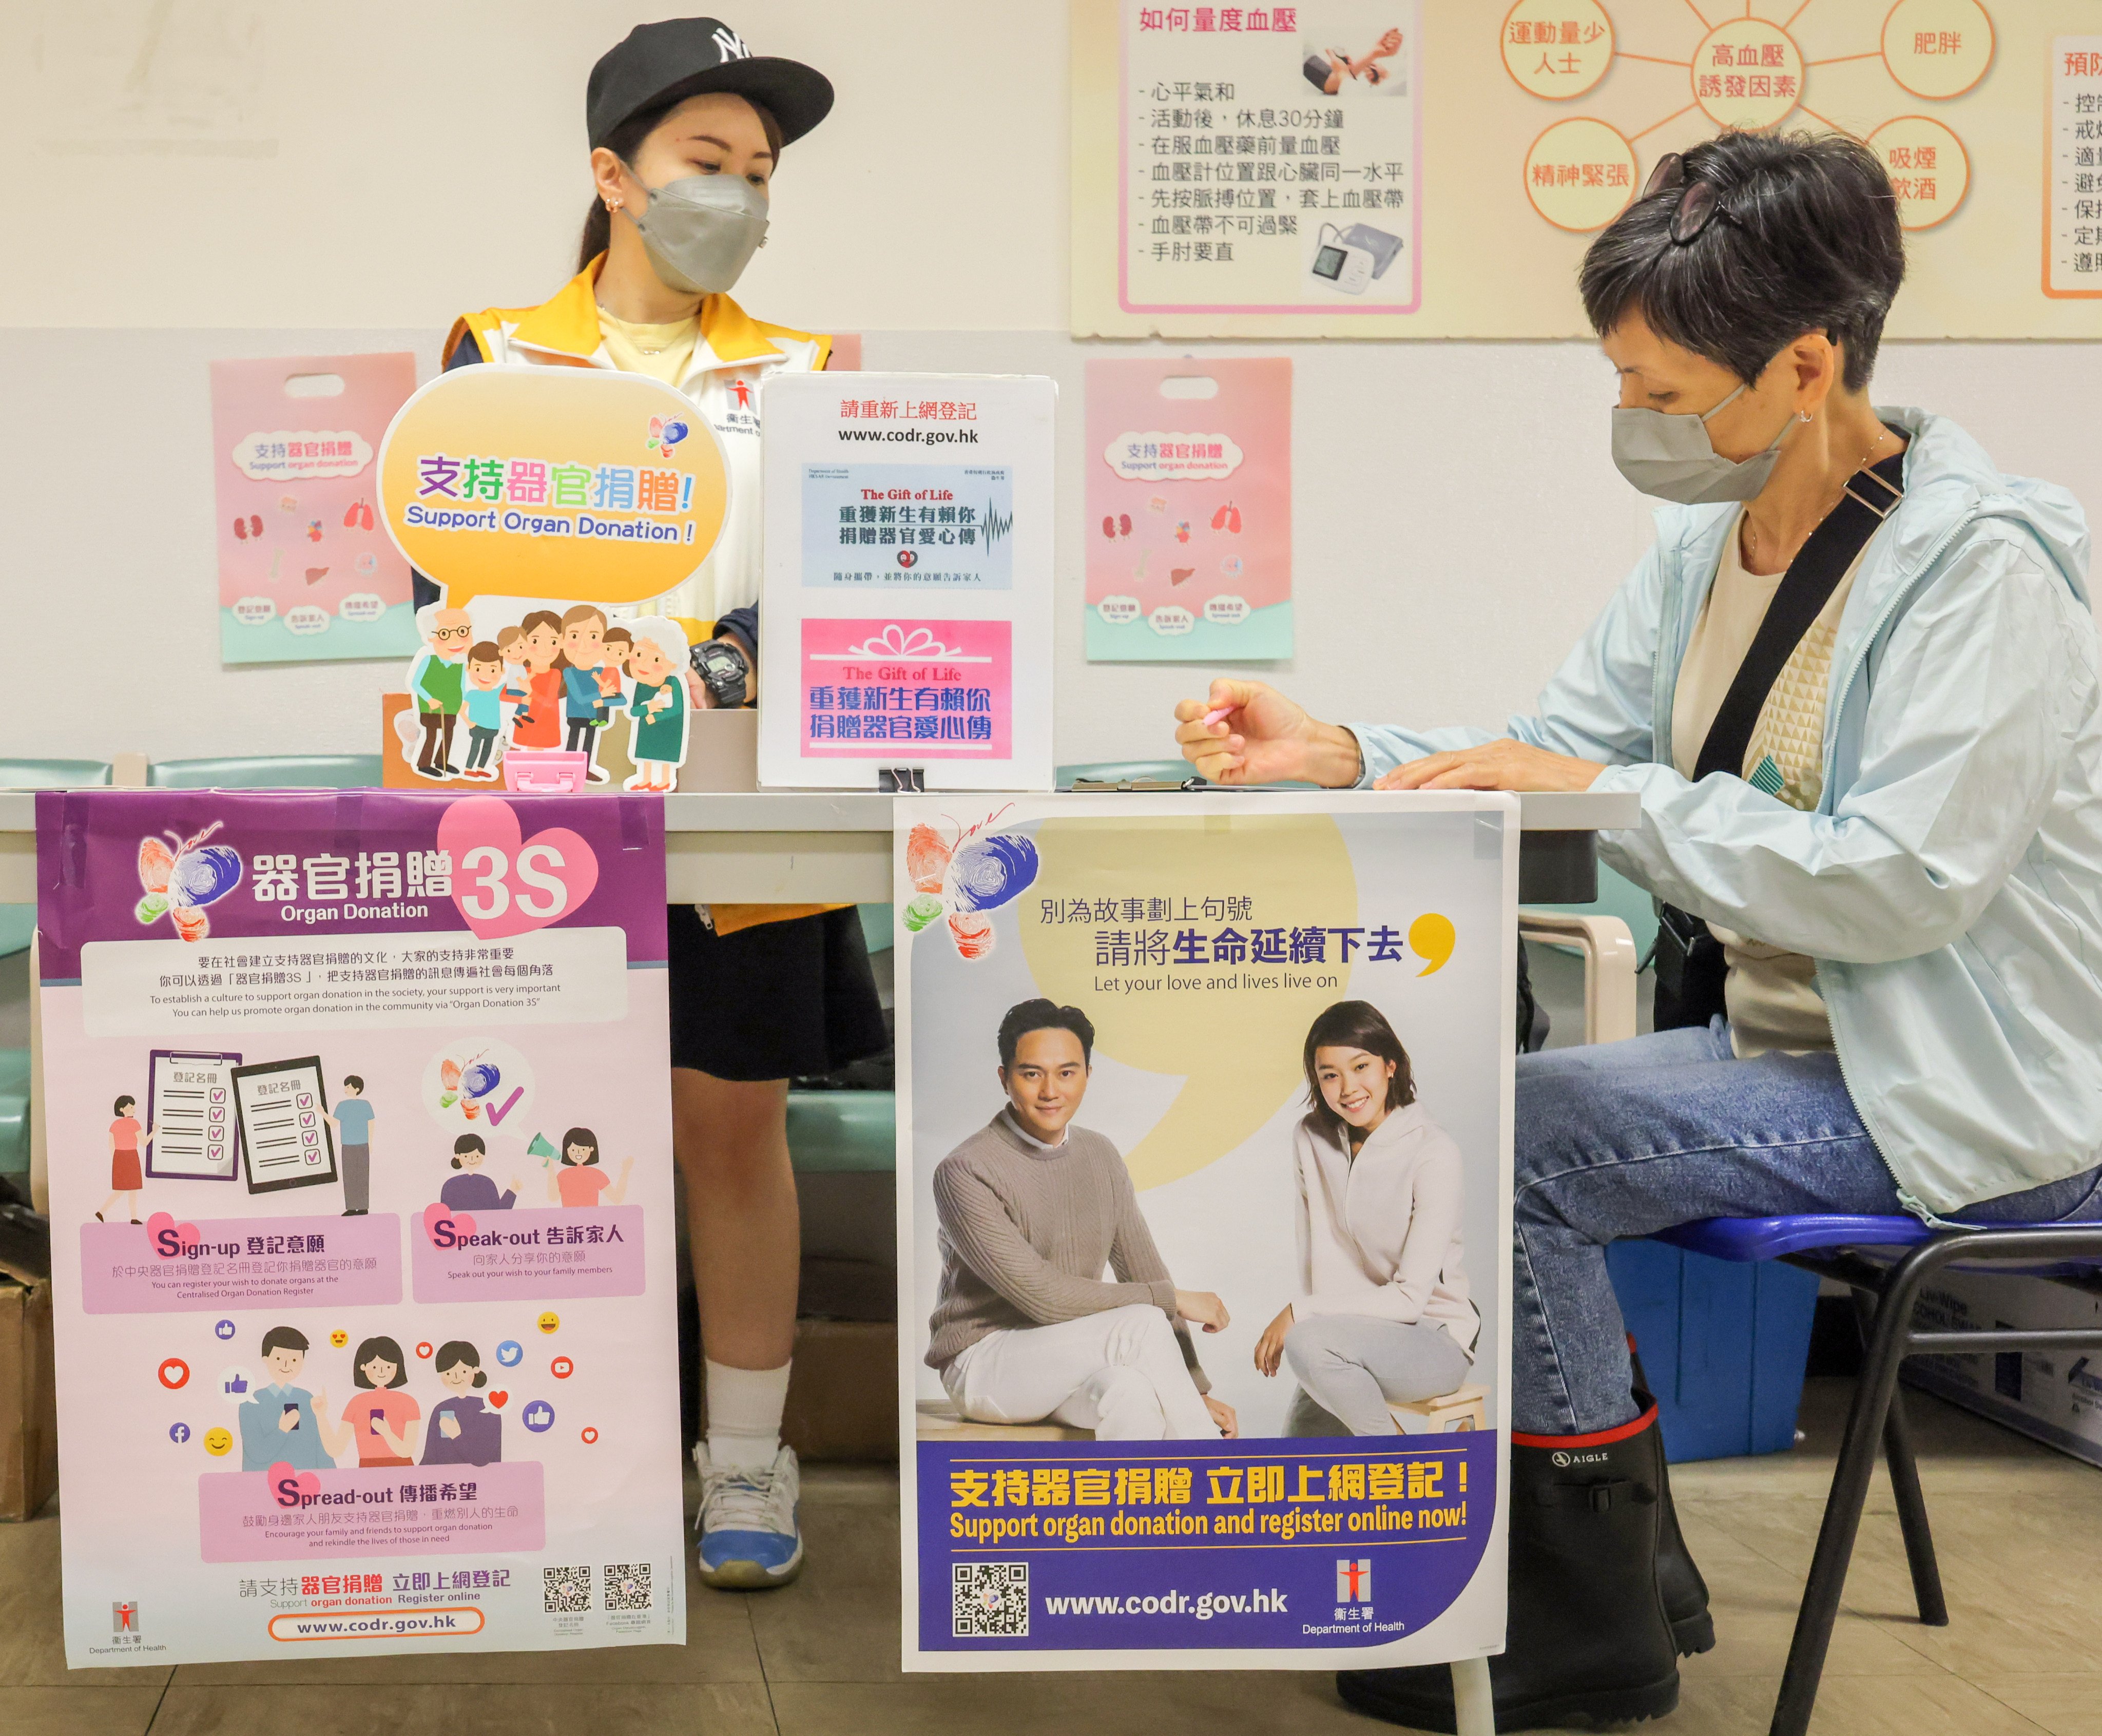 A resident registers for the city’s organ donation scheme at a hospital booth in Hong Kong. Photo: SCMP